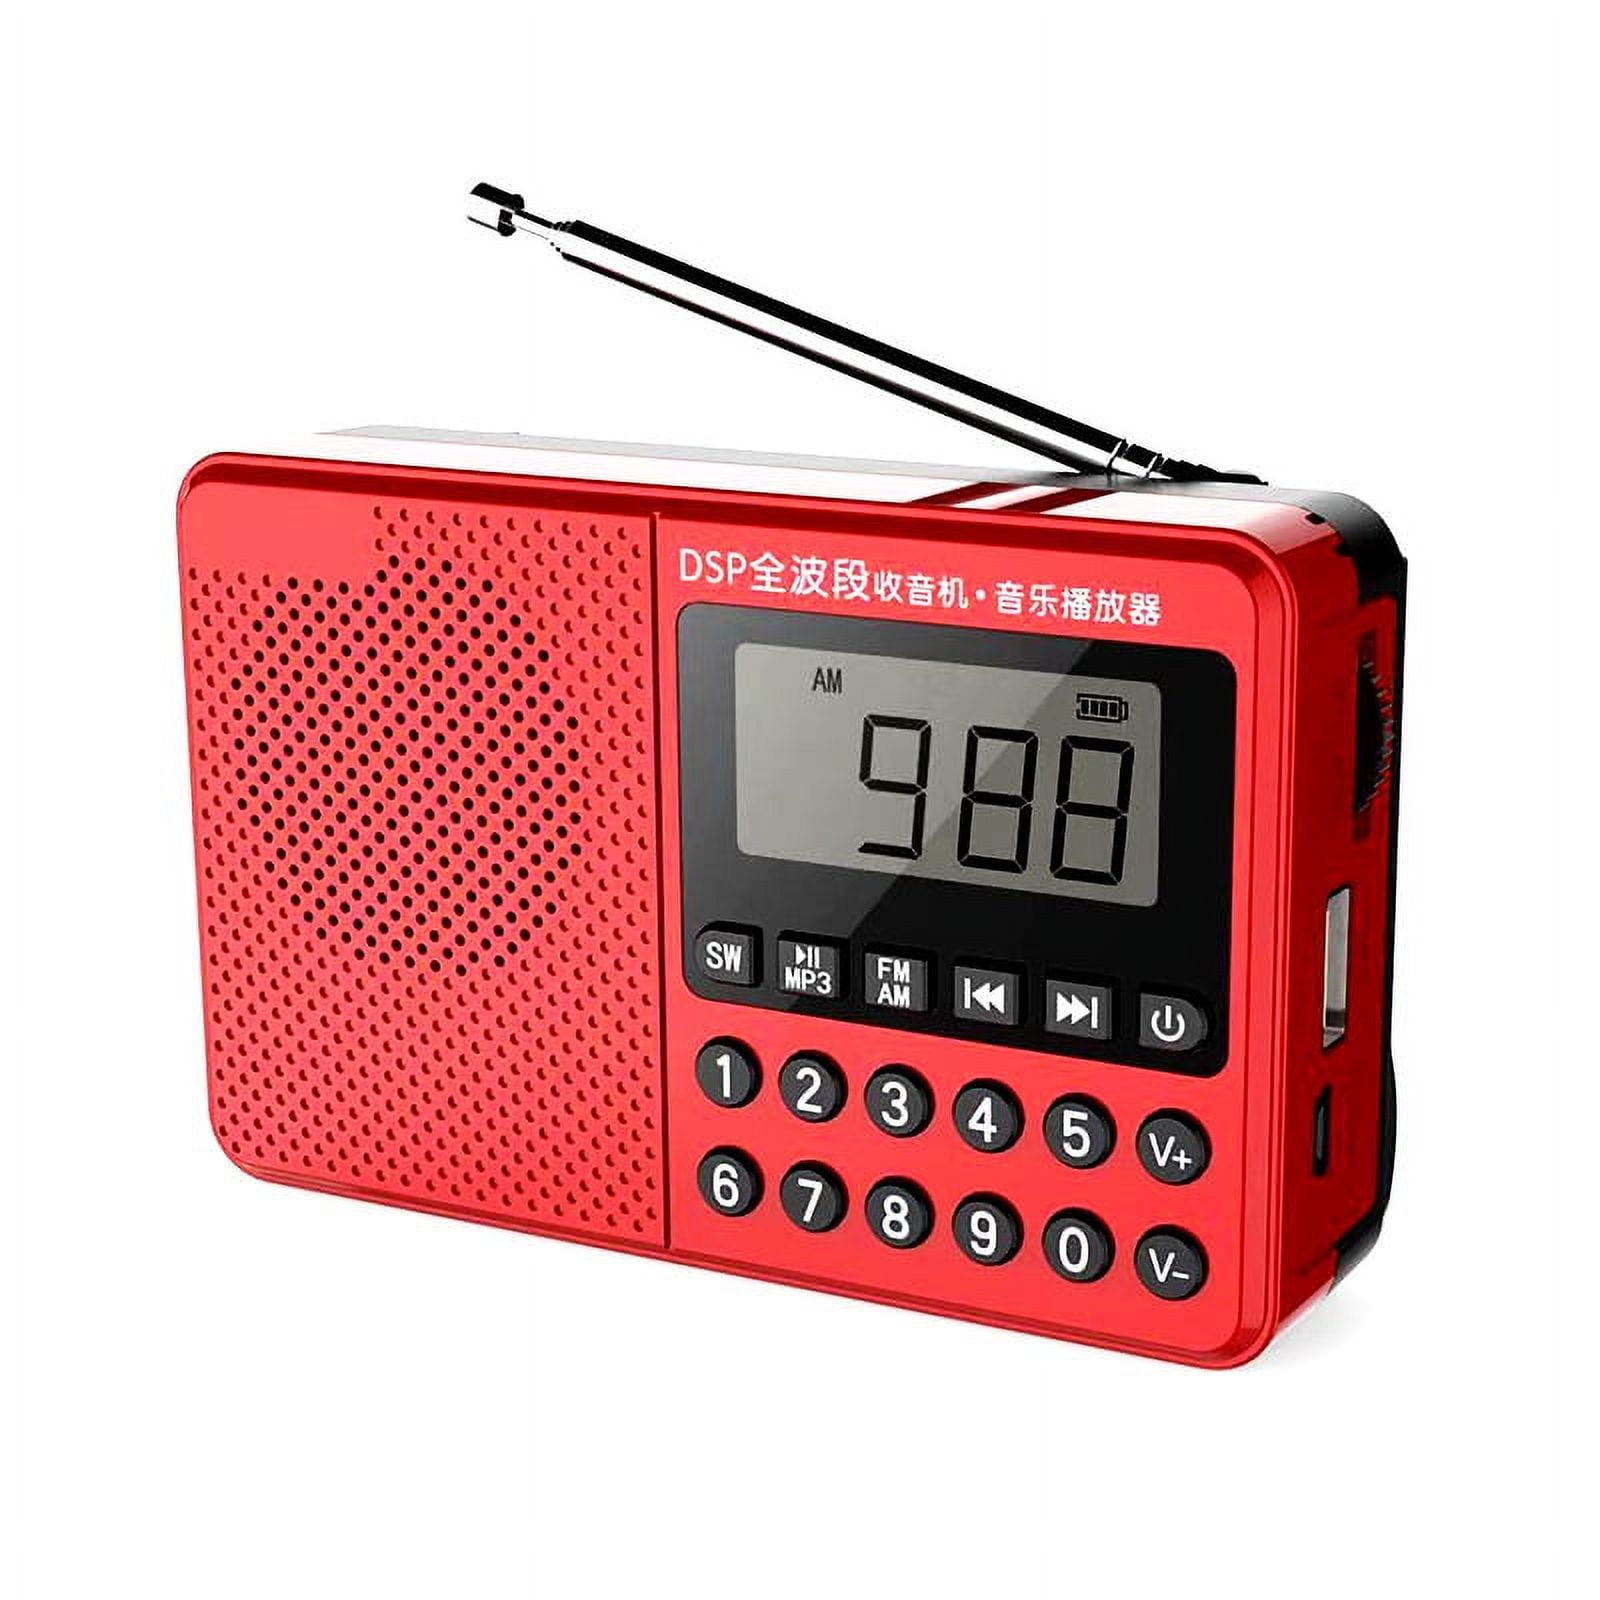 AceMonster Multi-Function Radio FM/AM/SW Multi-Band Radio Portable  Bluetooth Speaker MP3 Player can be Operated by Rechargeable Lithium  Battery/3 AA Batteries Support TF Card/U Disk 